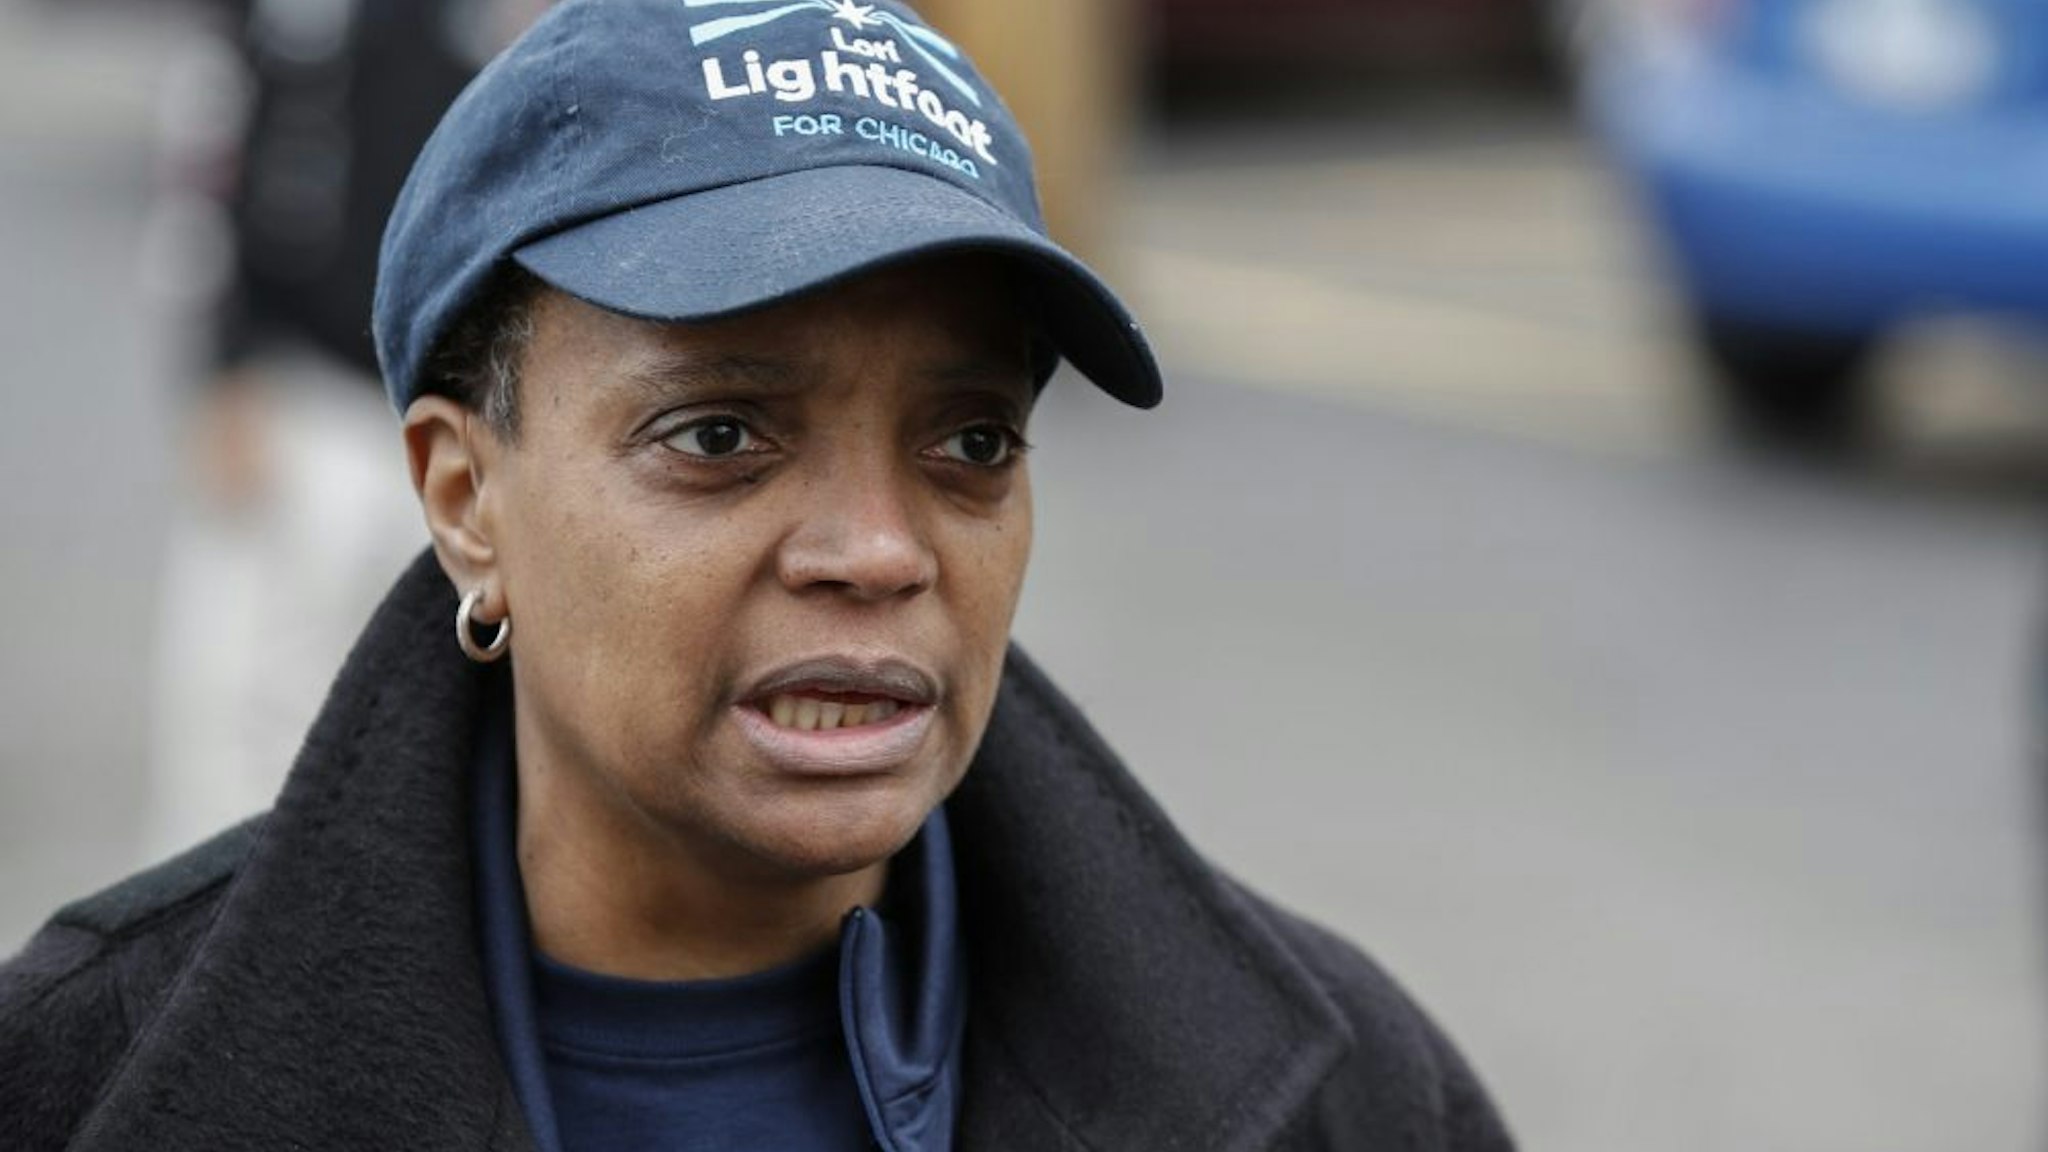 Chicago mayoral candidate Lori Lightfoot speaks to the press outside of the polling place at the Saint Richard Catholic Church in Chicago, Illinois on April 2, 2019. - Chicago residents went to the polls in a runoff election Tuesday to elect the US city's first black female mayor in a historic vote centered on issues of economic equality, race and gun violence. Lightfoot and Toni Preckwinkle, both African-American women, are competing for the top elected post in the city. (Photo by Kamil Krzaczynski / AFP) (Photo by KAMIL KRZACZYNSKI/AFP via Getty Images)